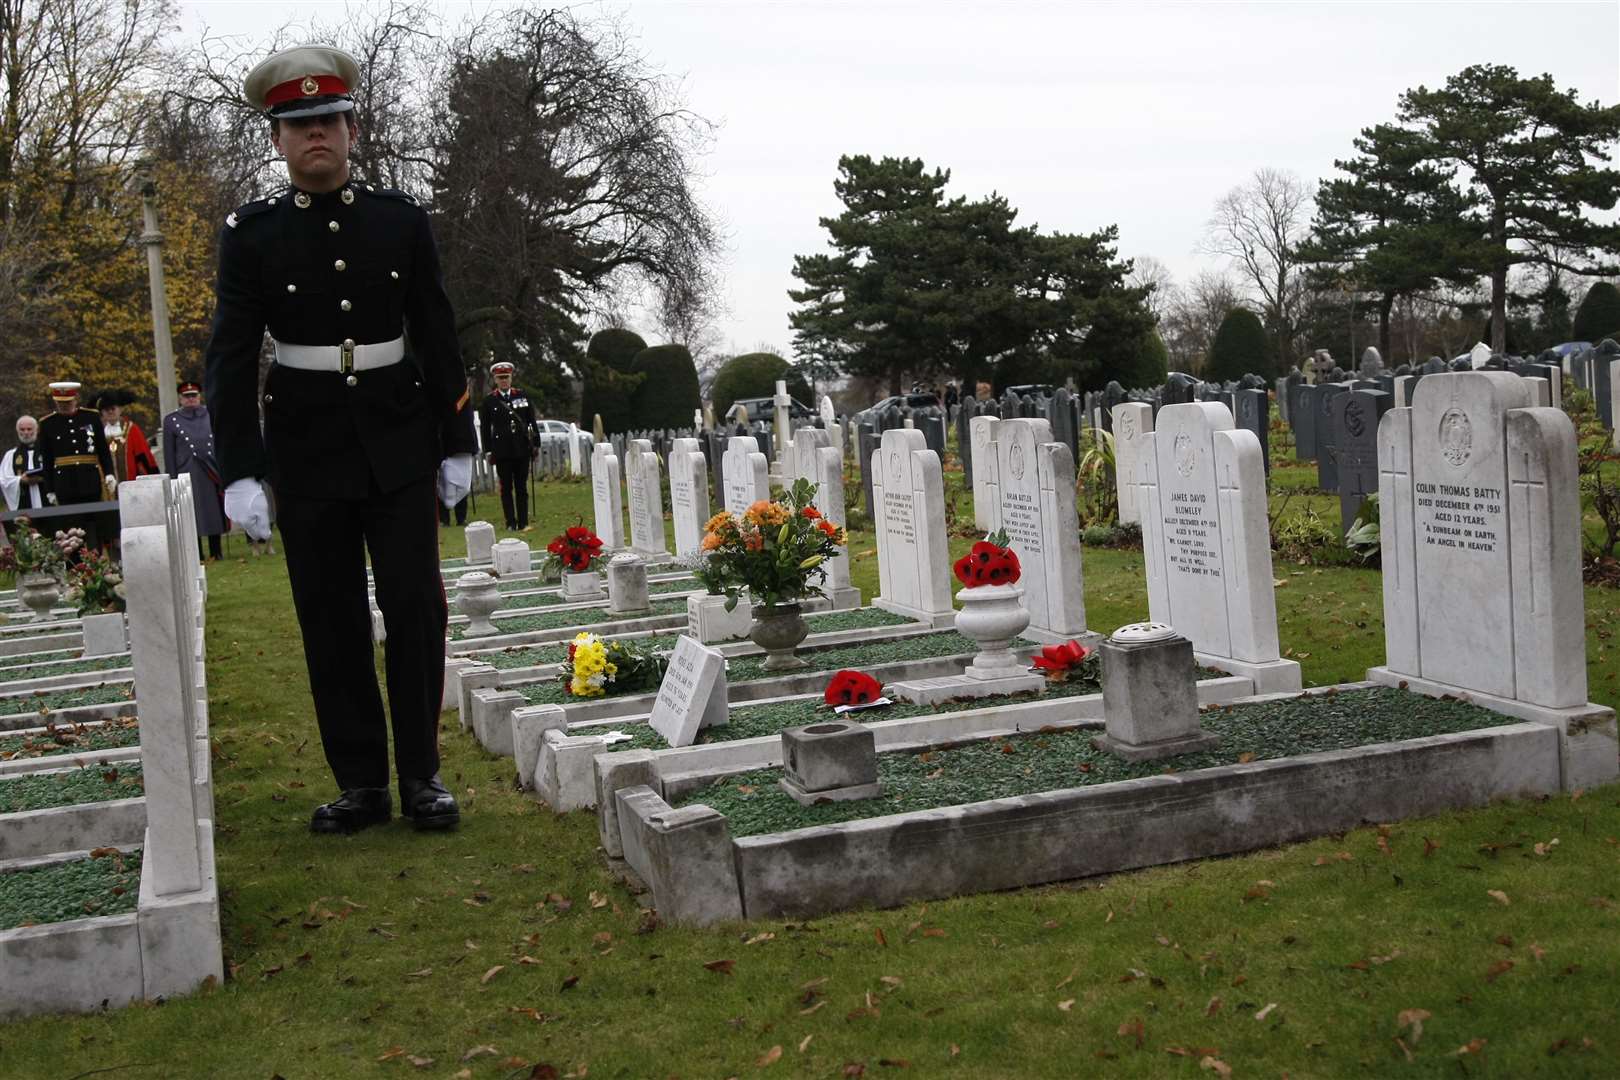 Two of the boys killed were not buried at the naval cemetery